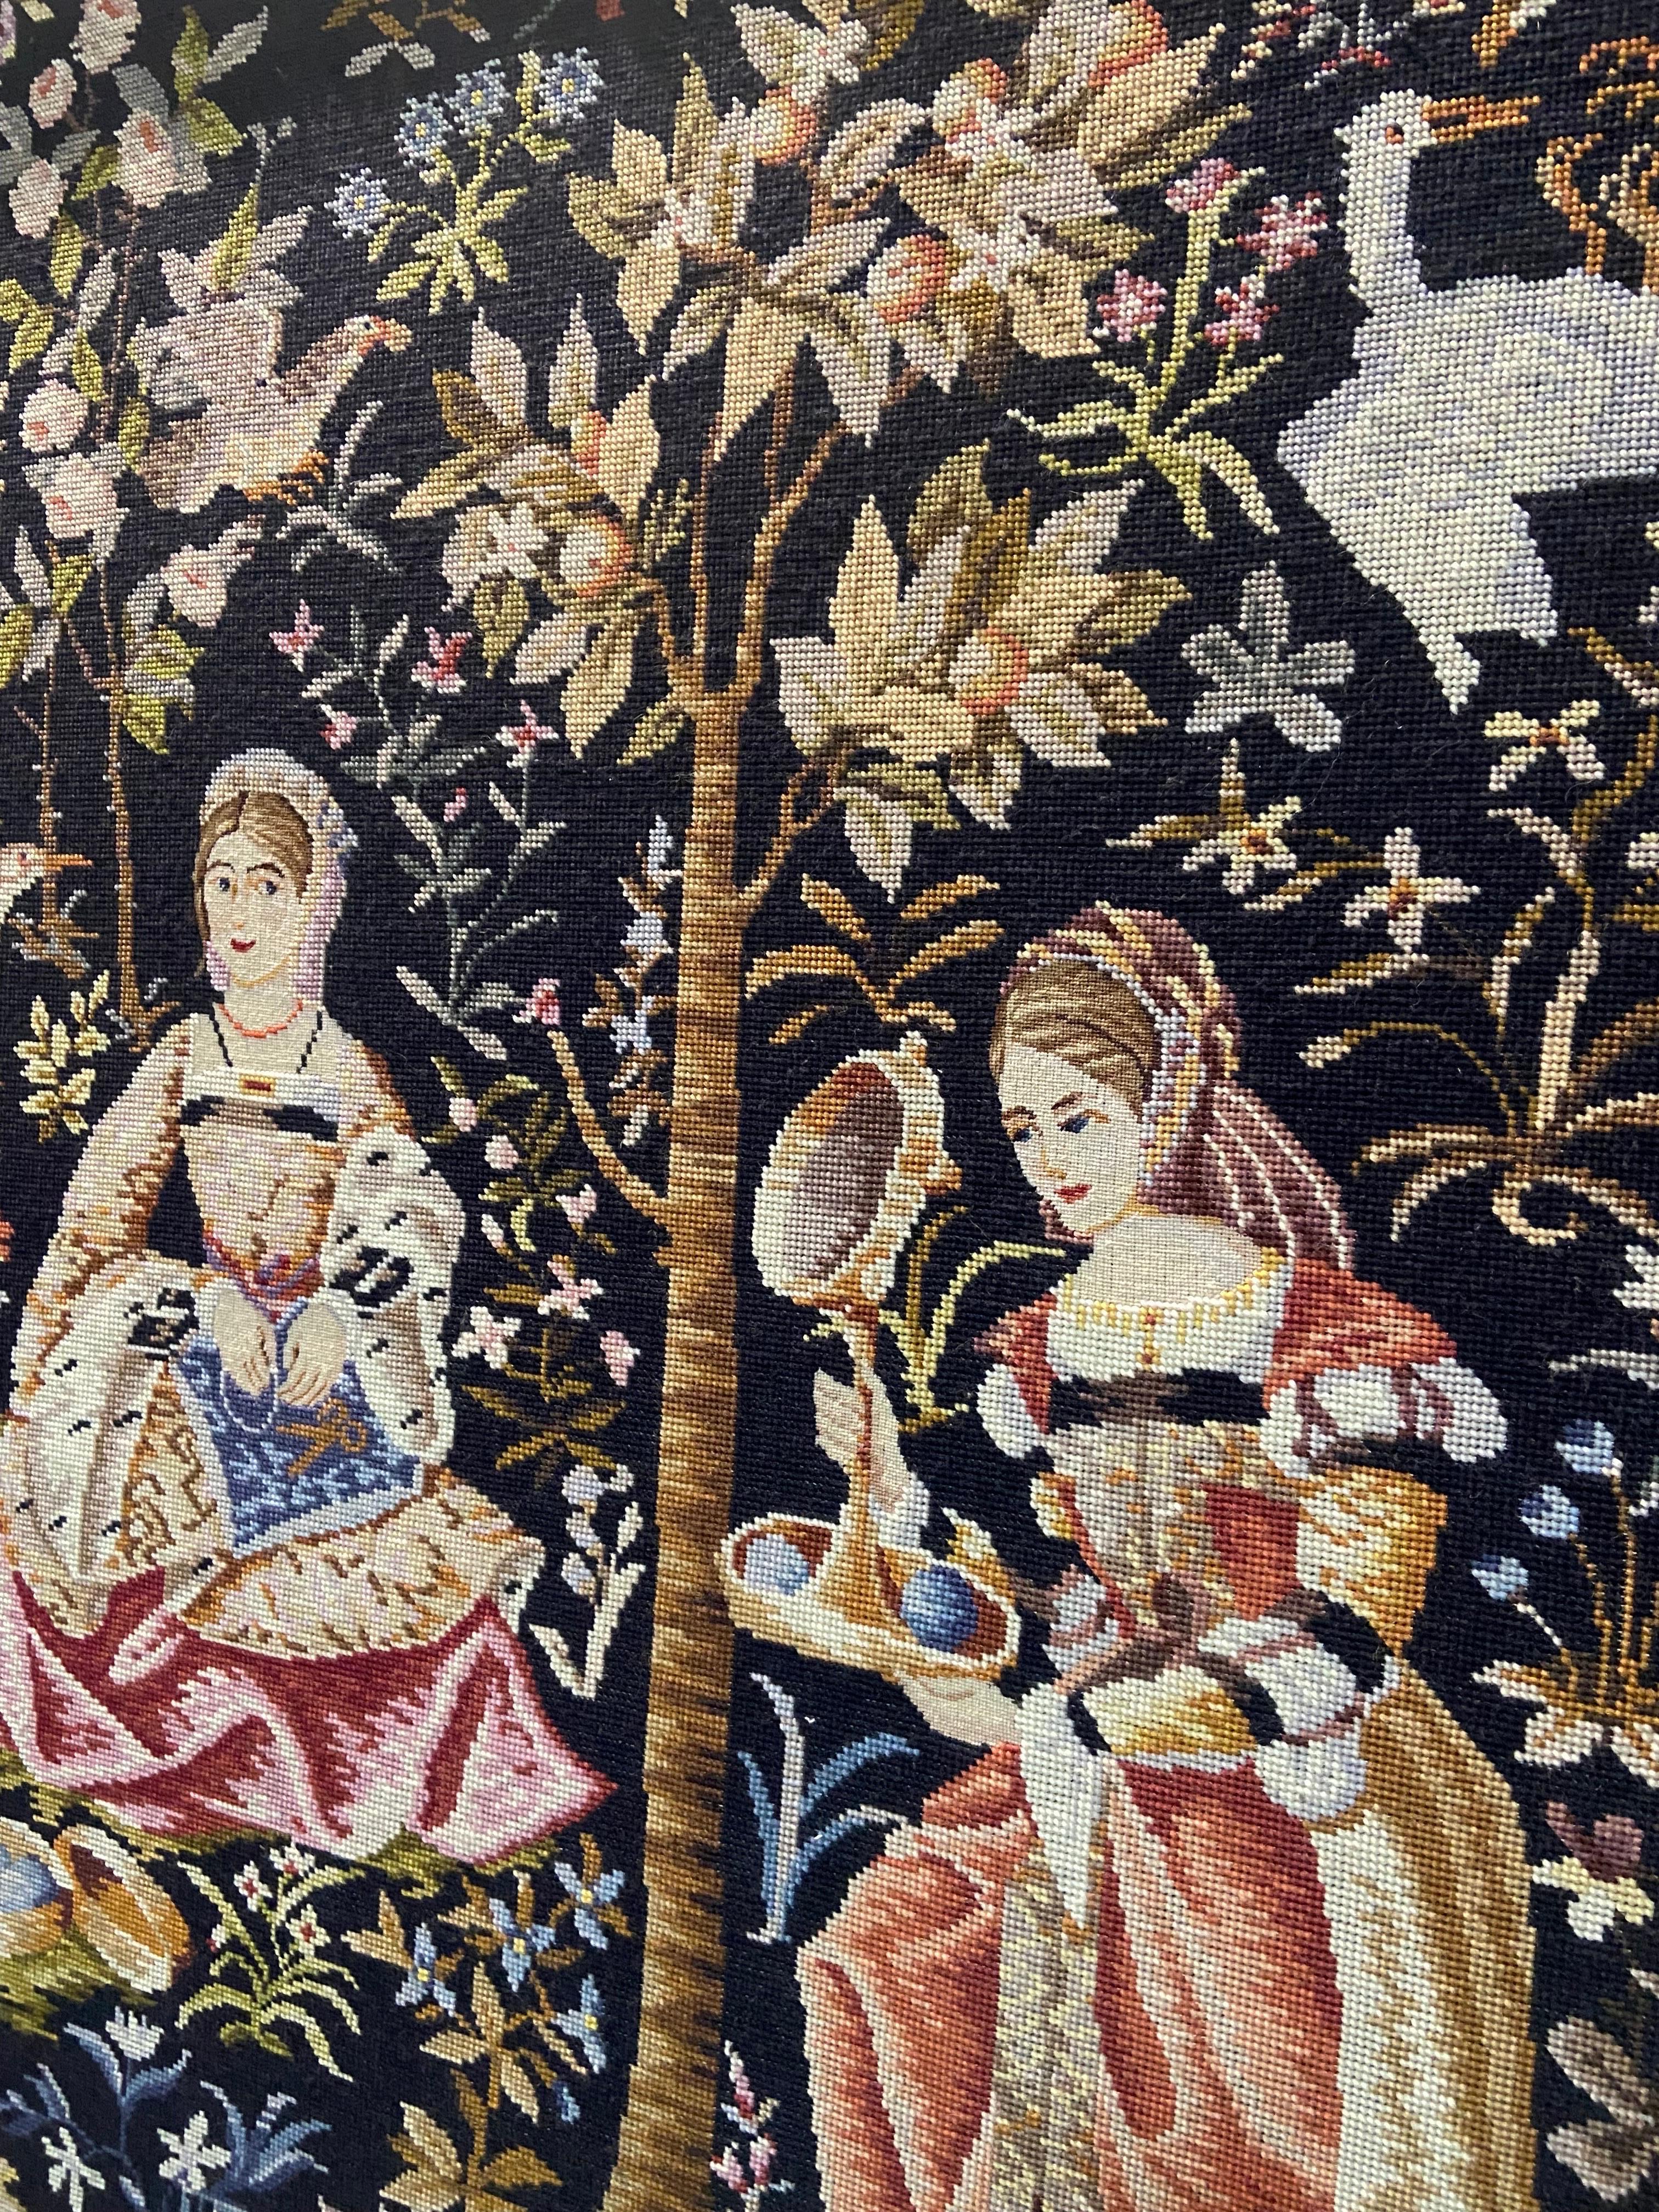 20th Century French Wool Machine Made Tapestry in Style of Aubusson Manufacture For Sale 2